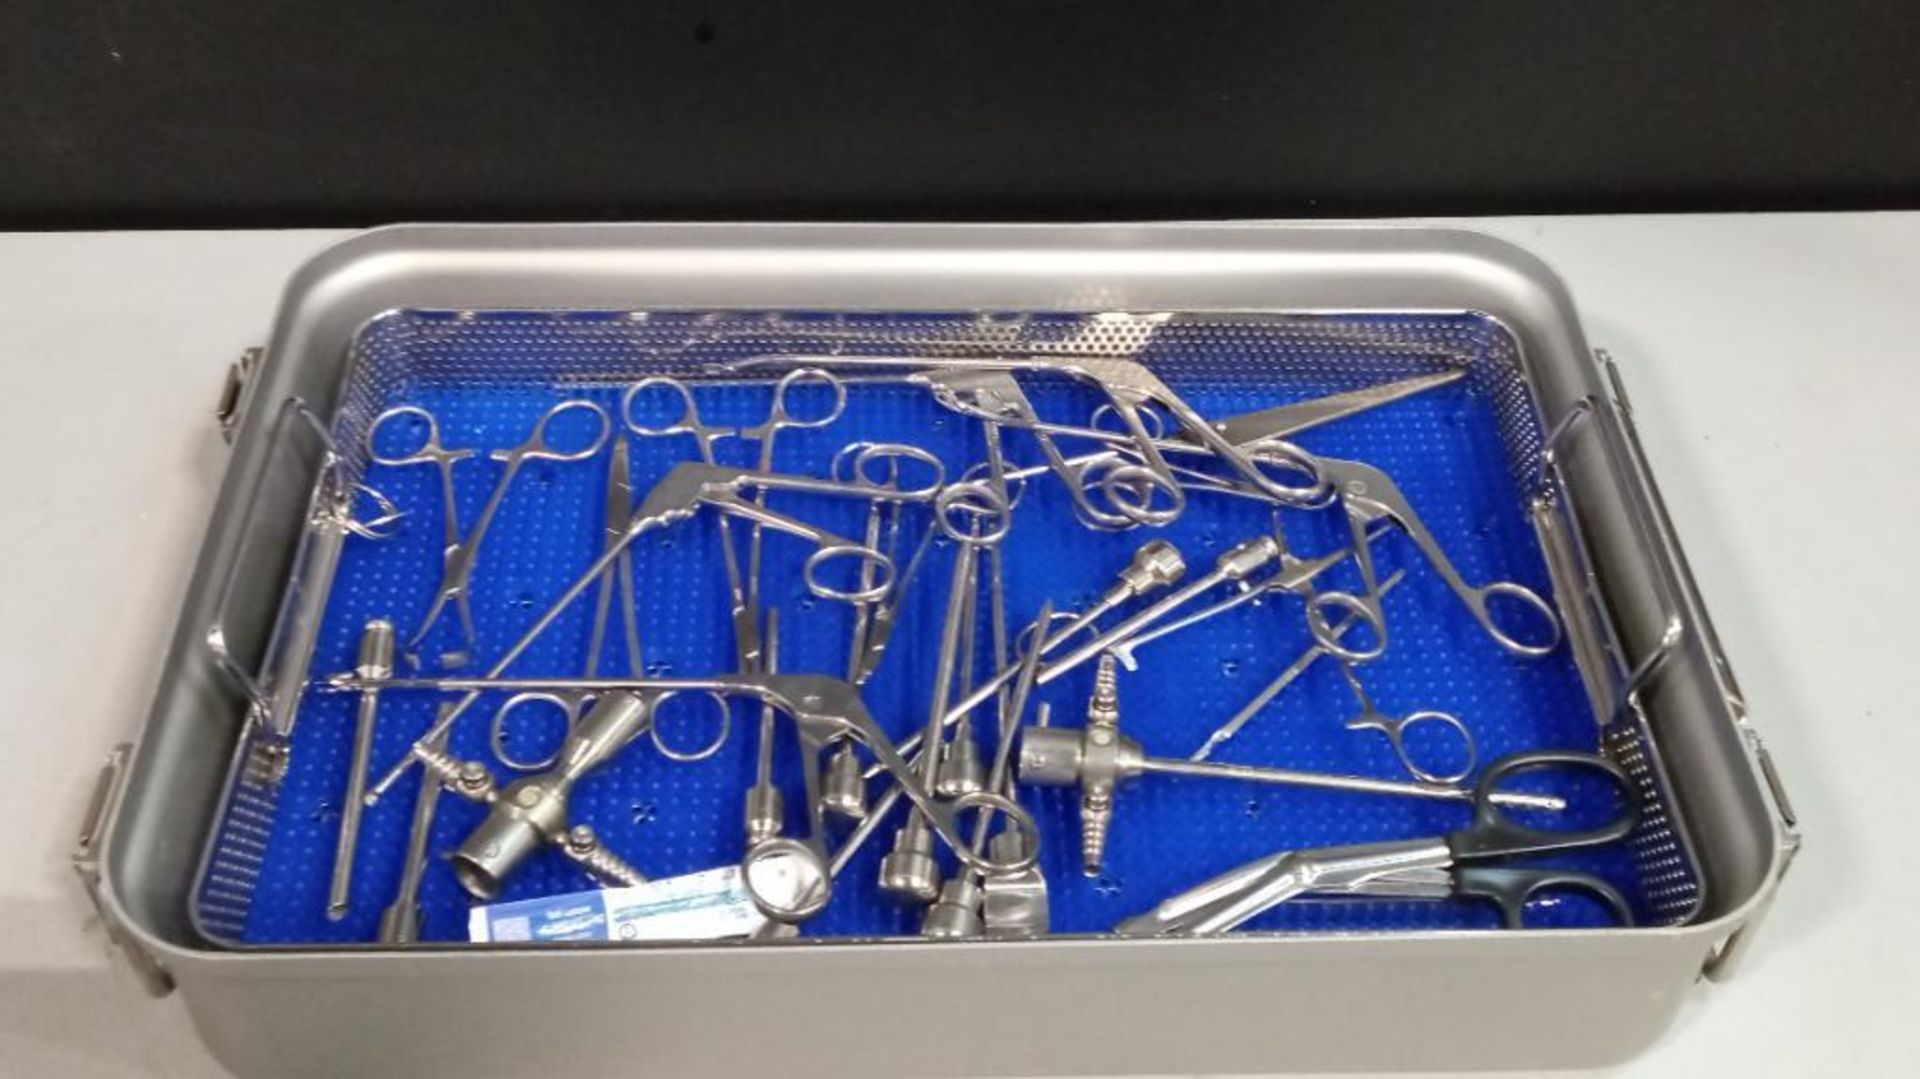 DYONICS AND OTHER BRANDS ARTHROSCOPY INSTRUMENTS - Image 2 of 2